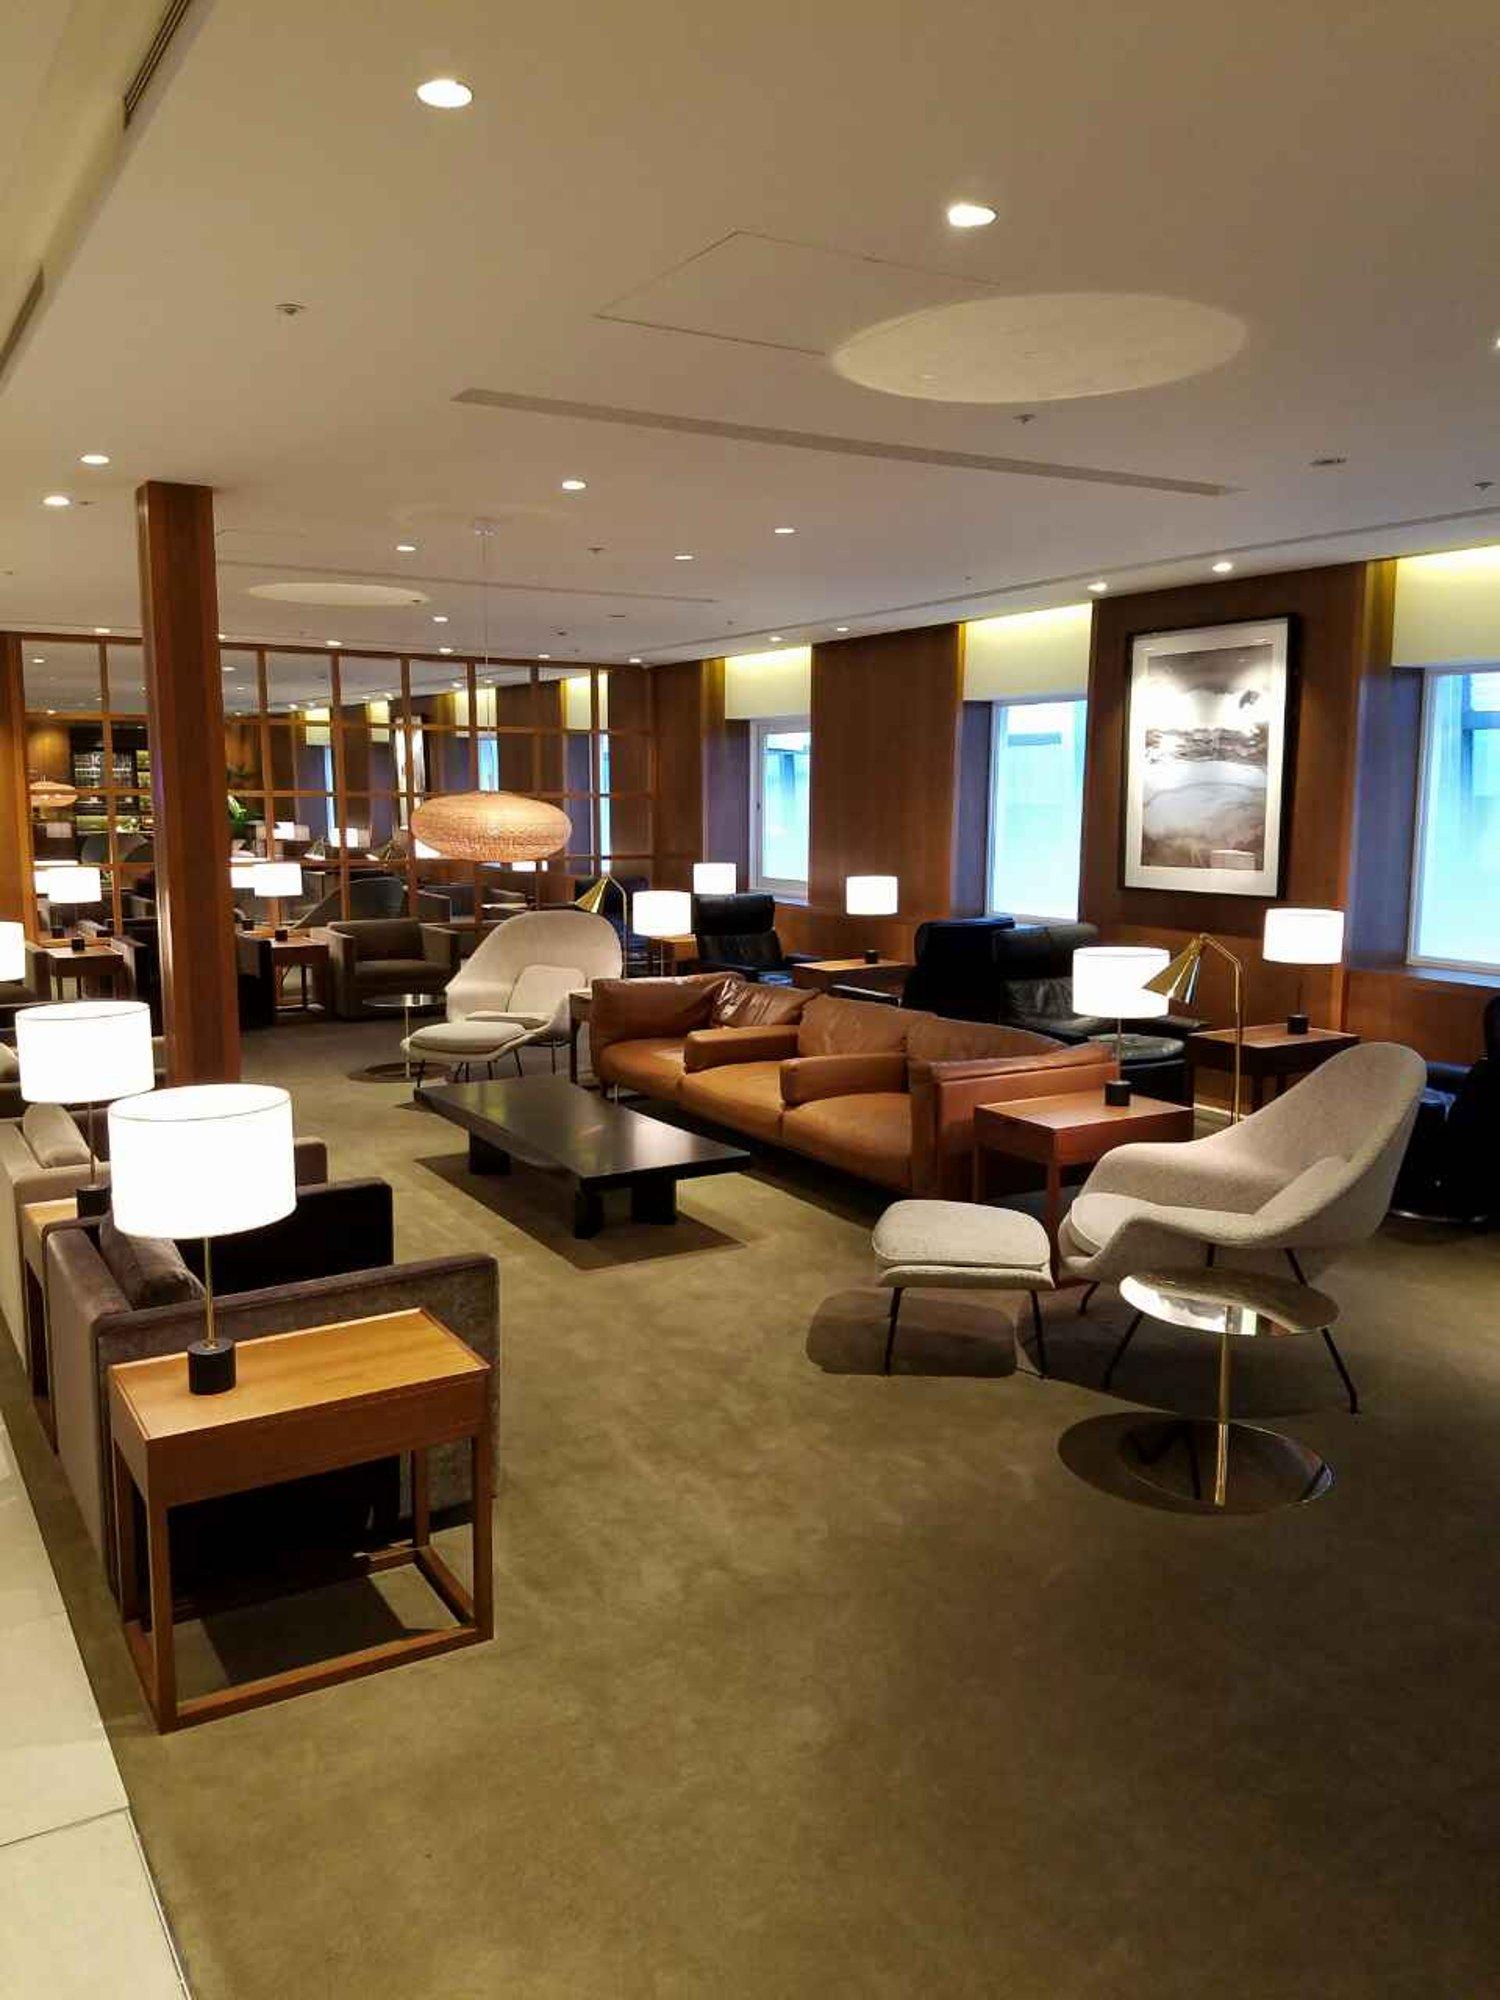 Cathay Pacific Lounge image 13 of 37